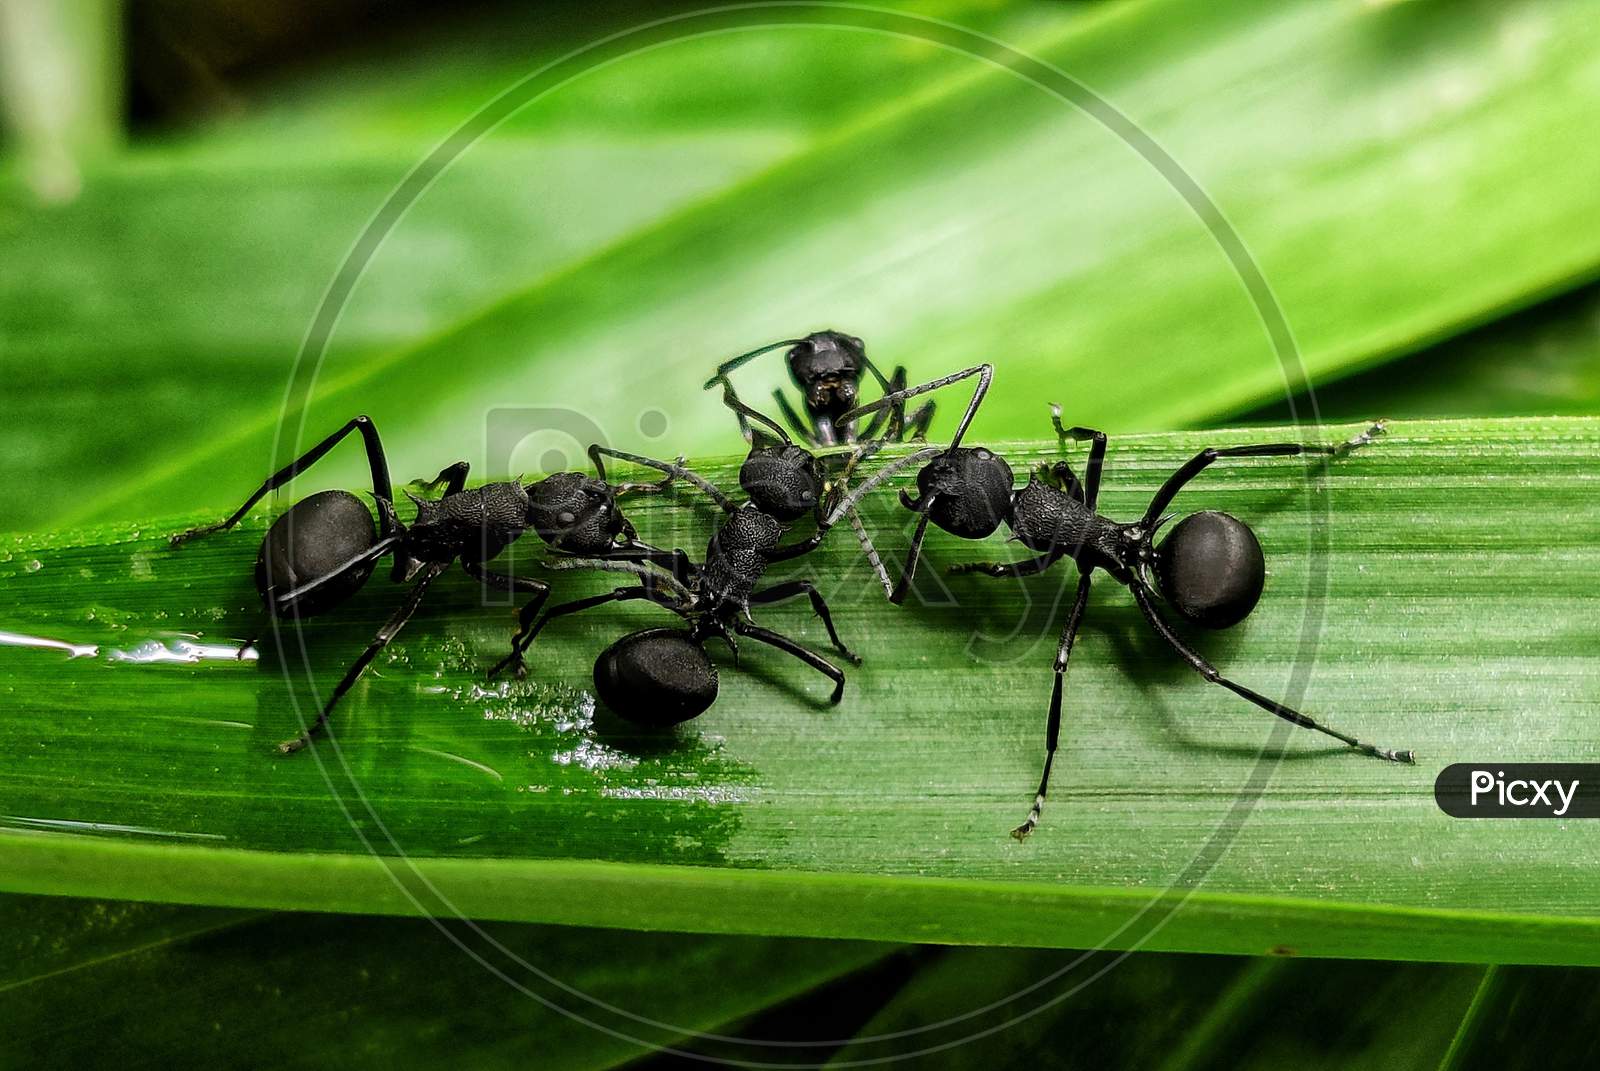 Ants are having the Meeting.